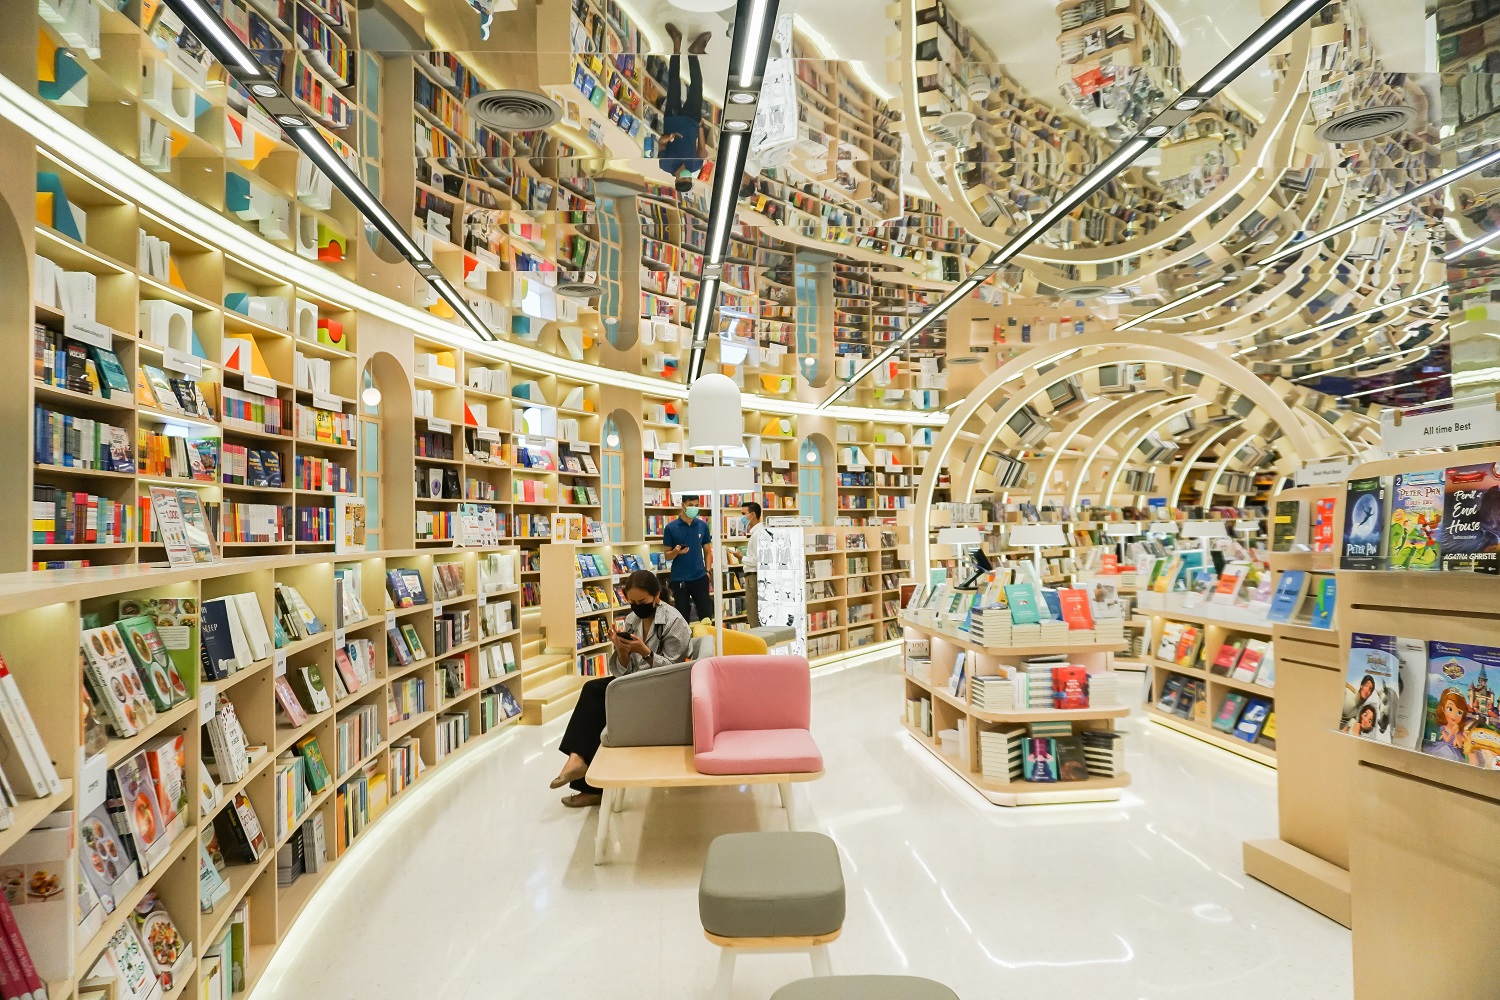 B2S Think Space inside Central Chidlom. Photo: Coconuts Bangkok